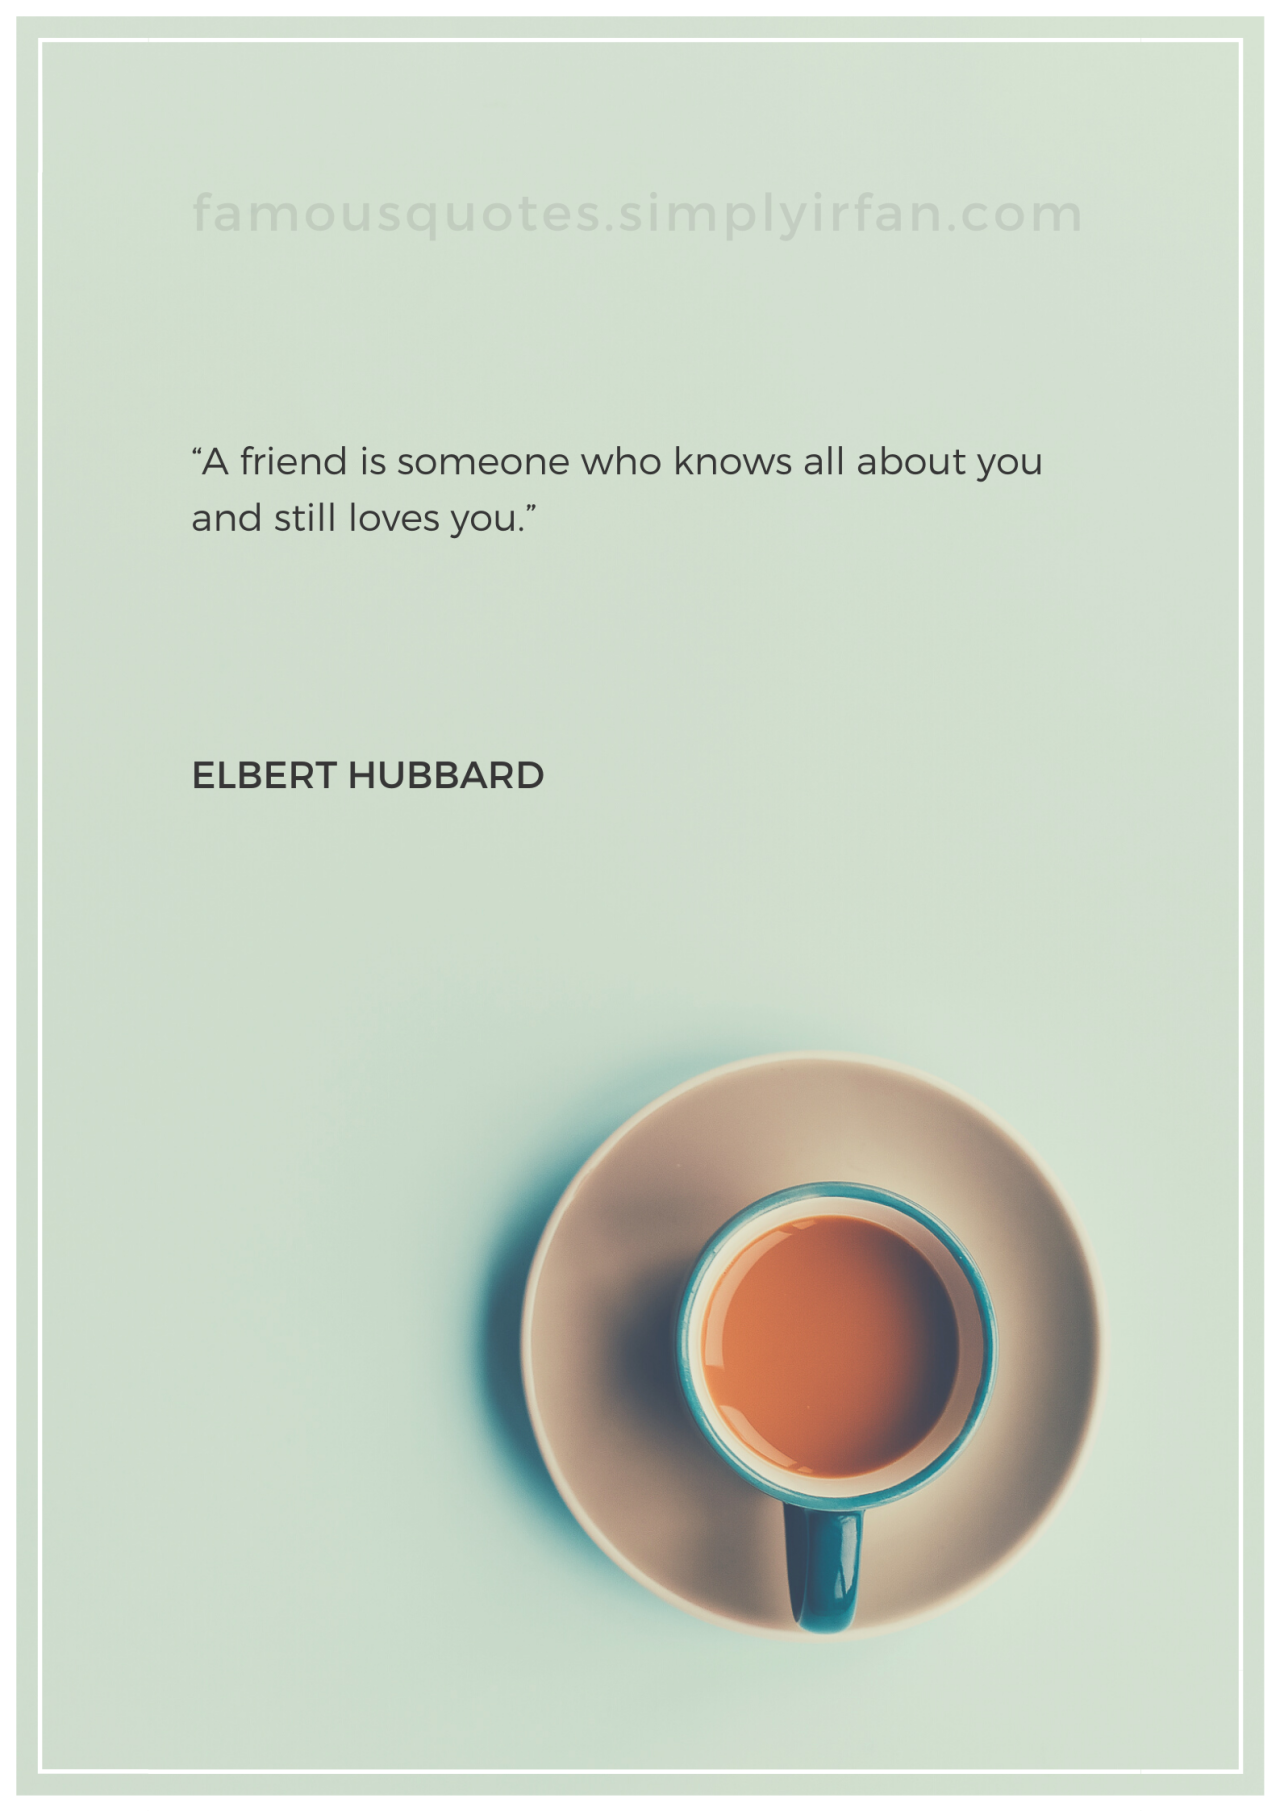 Famous Love Quote: "A friend is someone who knows all about you and still loves you." by Elbert Hubbard